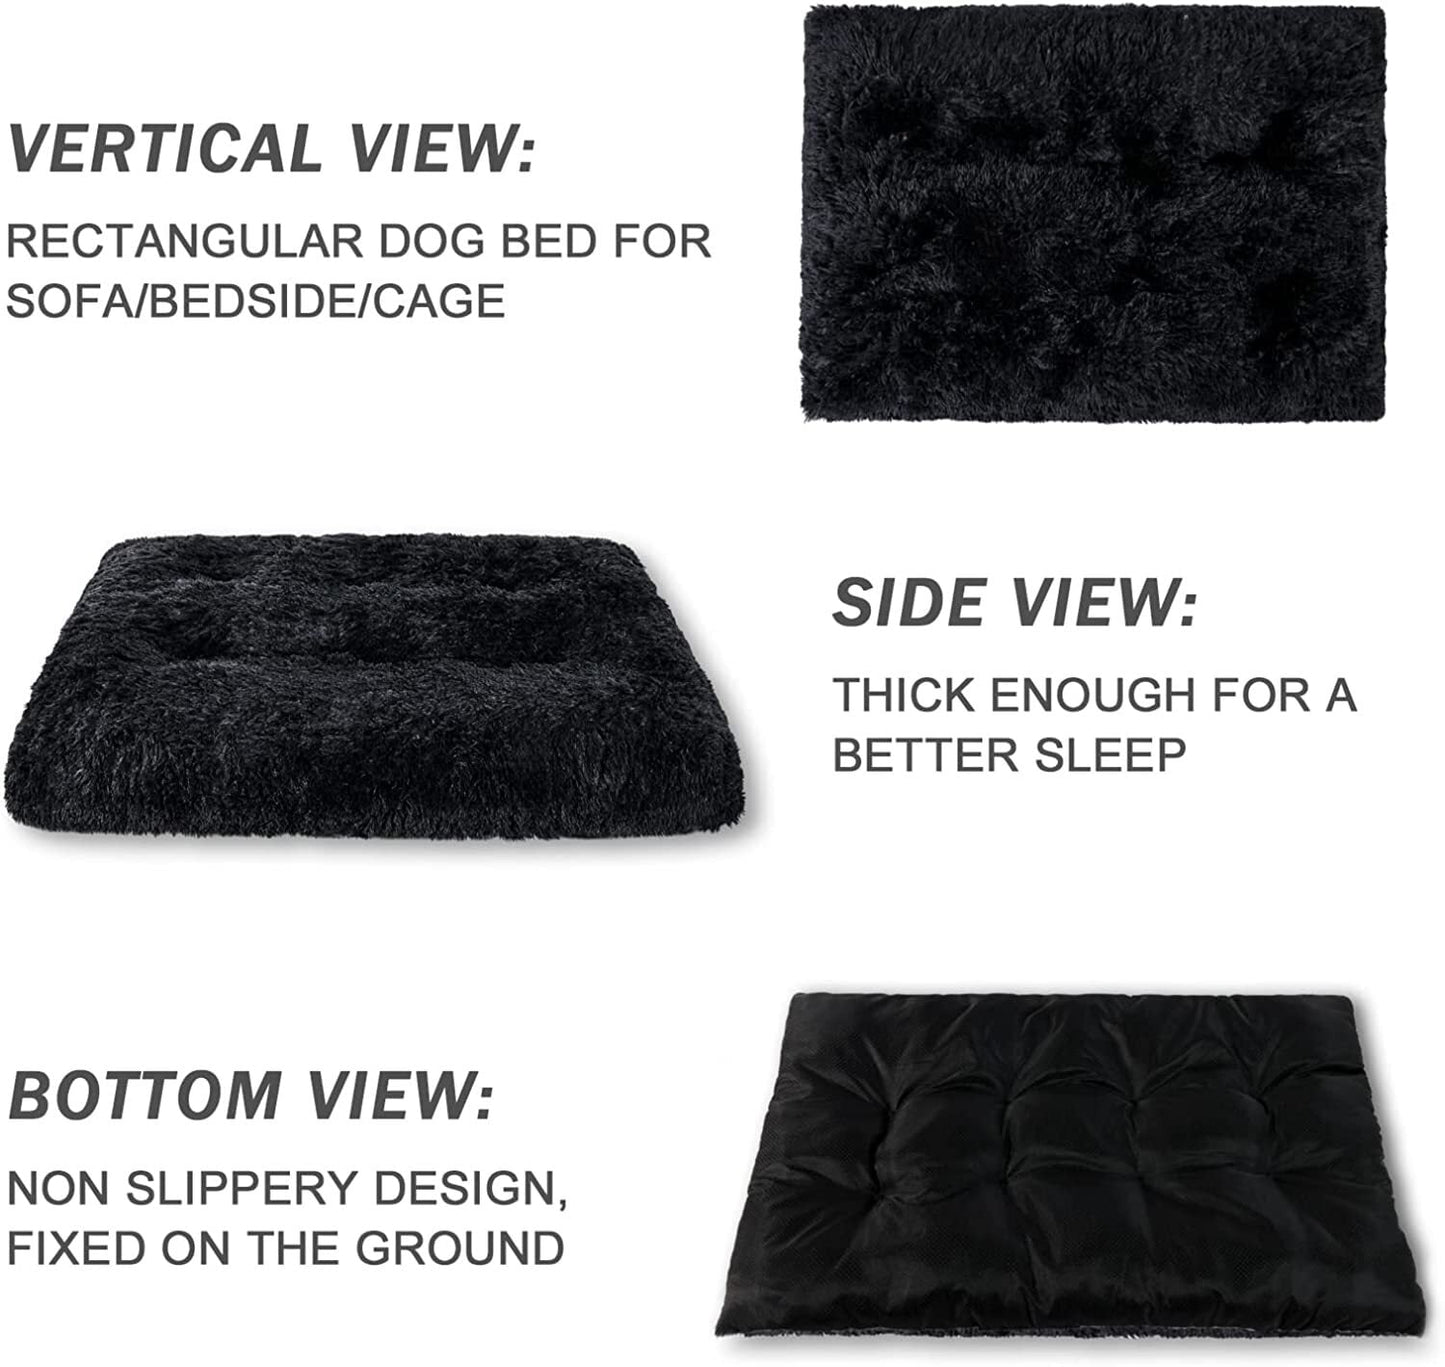 Exclusivo Mecla Soft Plush Dog Bed Crate Mat for Small Dogs (26*20*4 in), Faux Fur Fluffy Dog Pet Cat Kennel Pad with Anti-Slip Bottom, Machine Washable Black